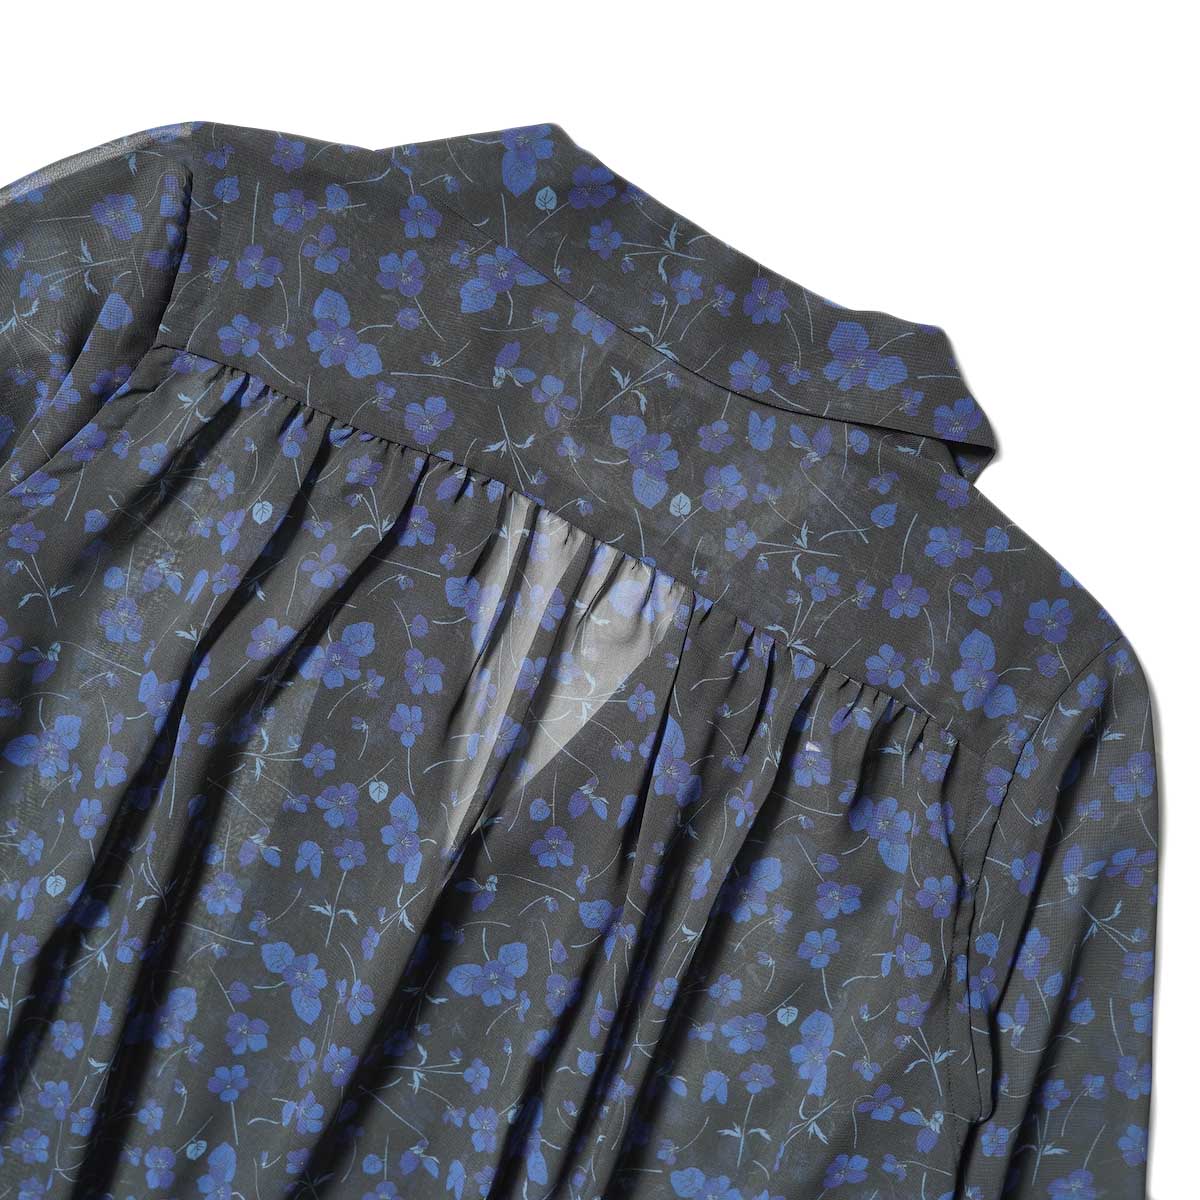 Needles / Gathered Blouse - Poly Chiffon / Floral Printed (Black) 背面ギャザー